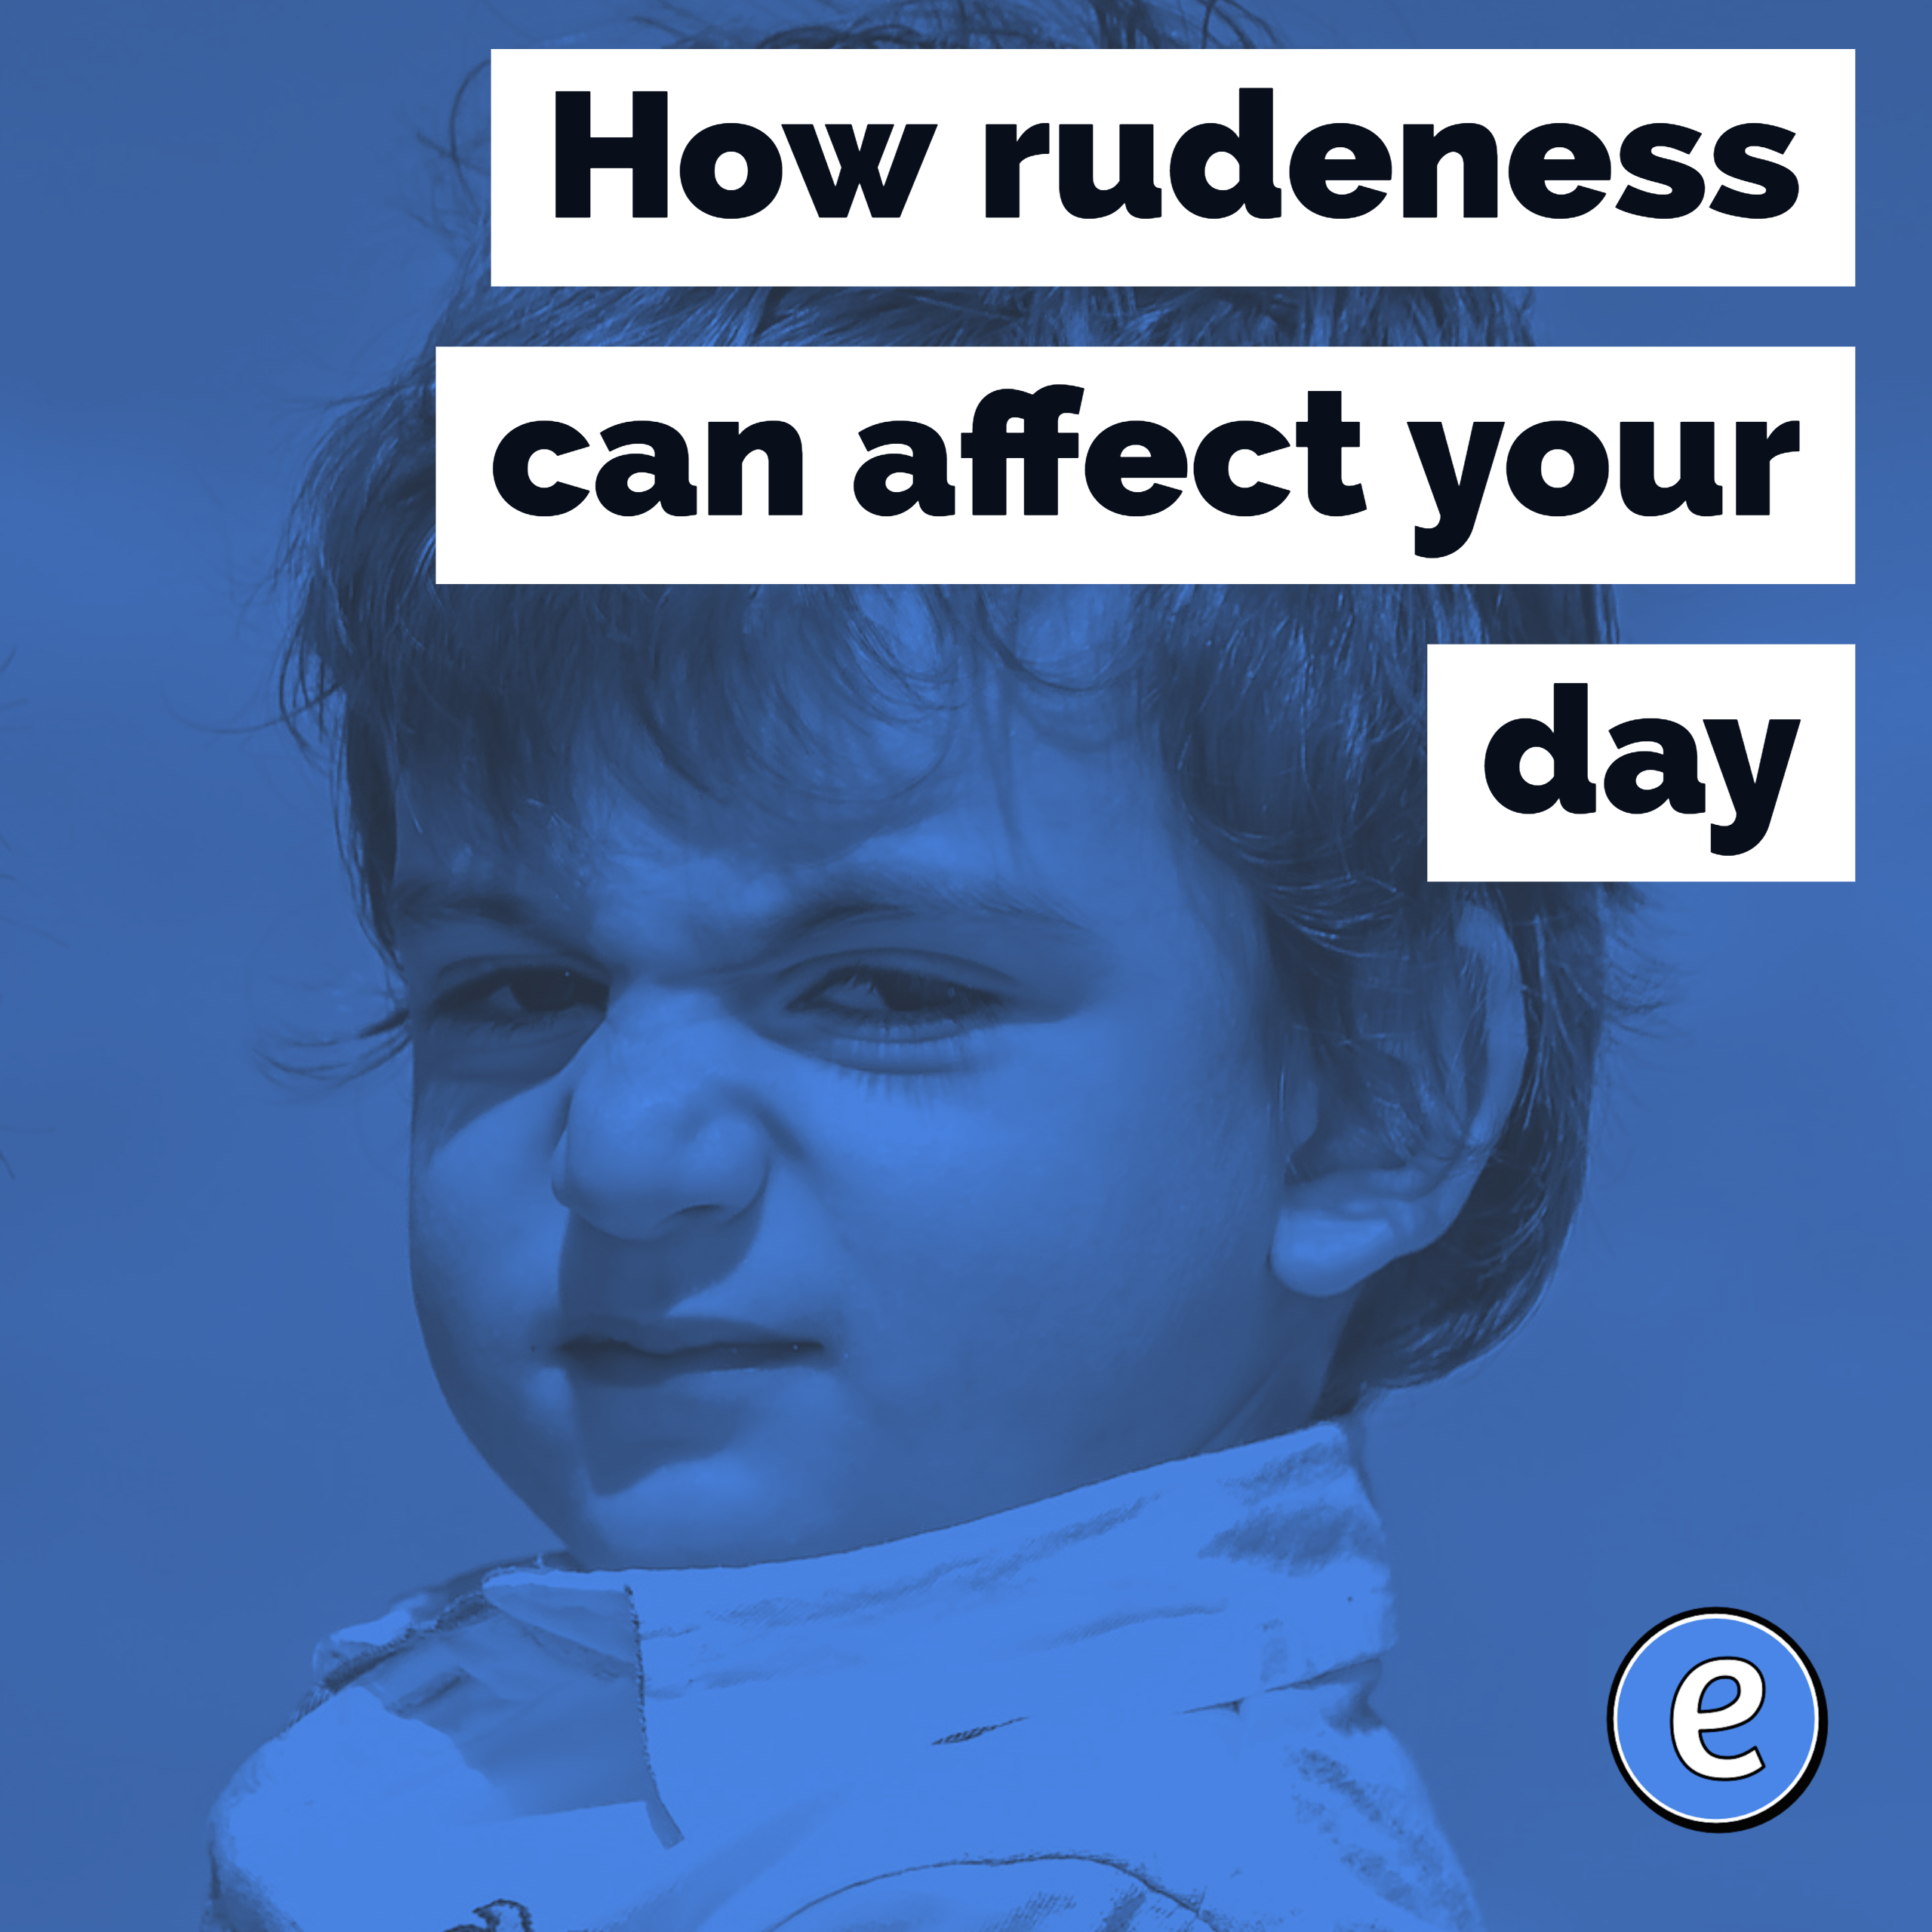 How rudeness can affect your day